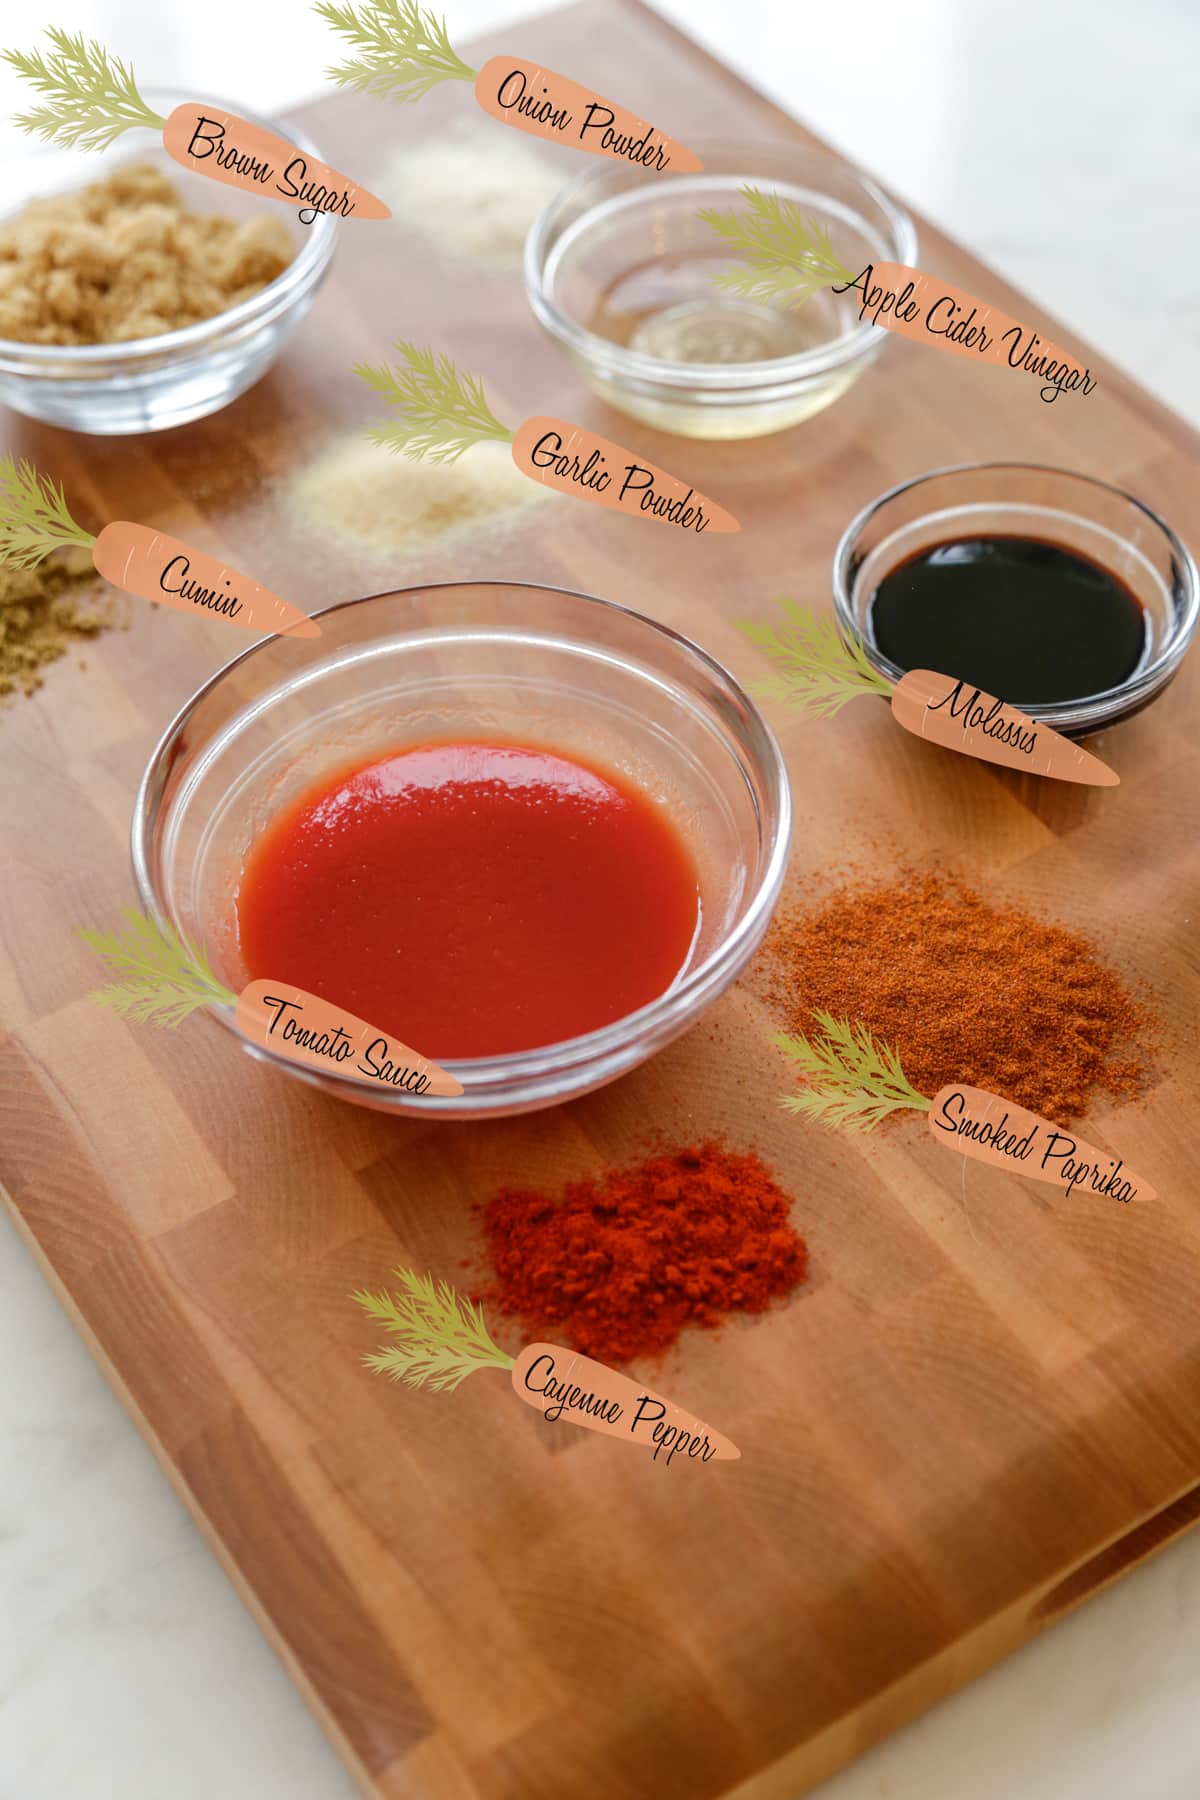 Ingredients for homemade BBQ sauce on a wood board.